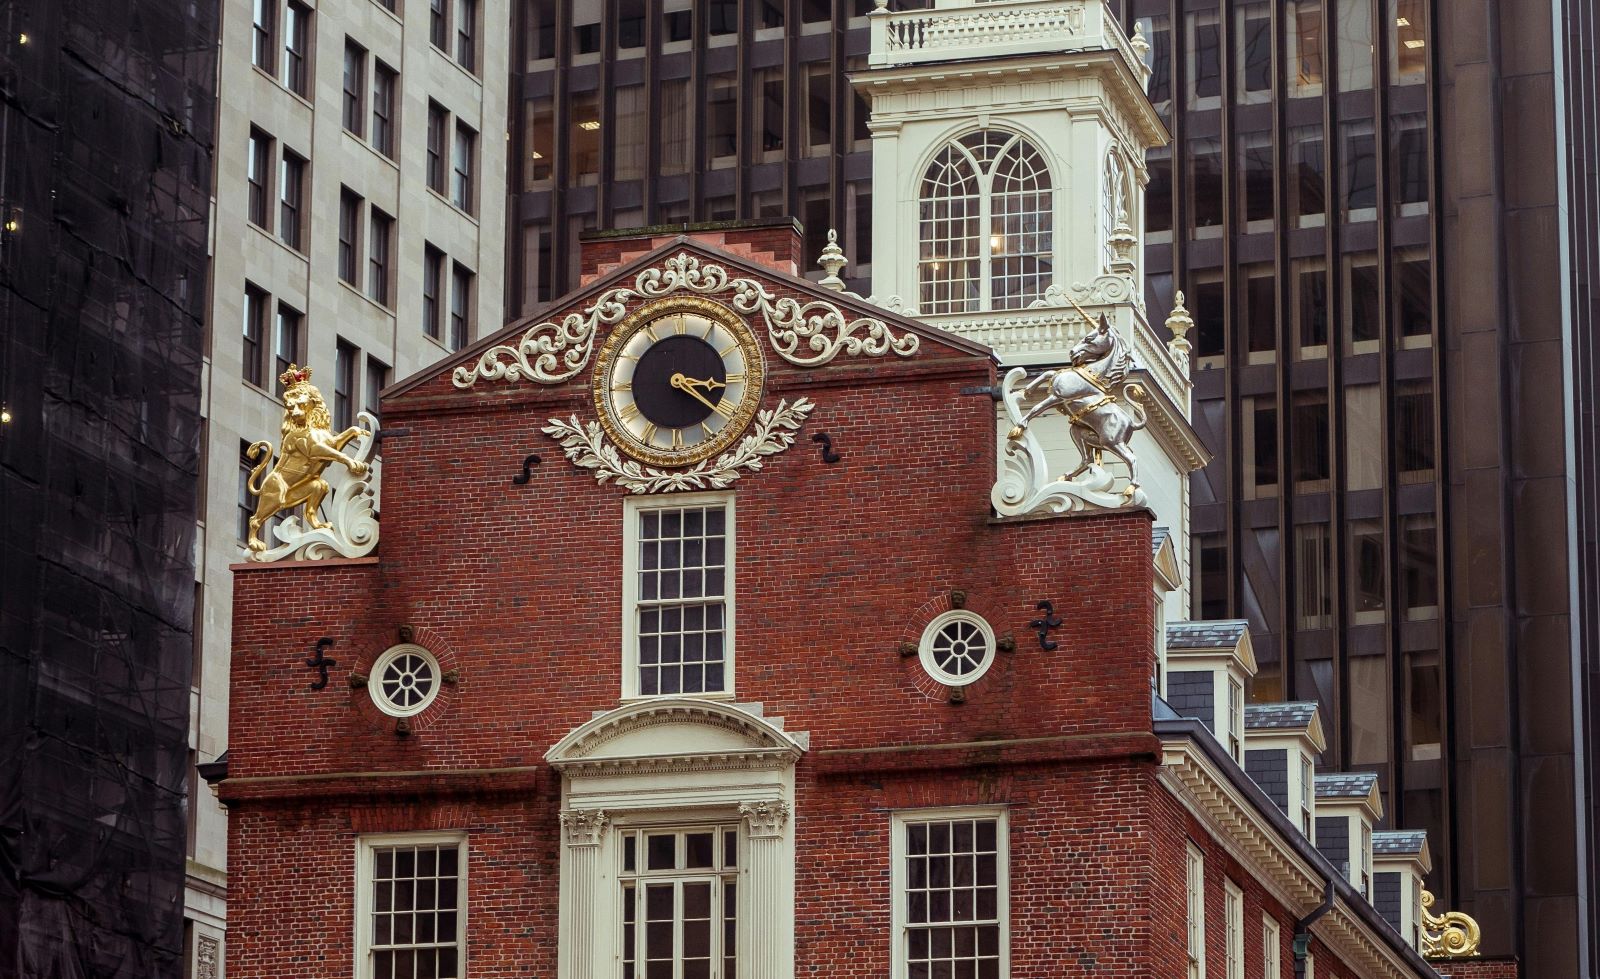 <p class="wp-caption-text">Image Credit: Pexels / Harrison Haines</p>  <p>The Old State House, Boston’s oldest public building, was the center of politics in the colonies. Don’t miss the balcony where the Declaration of Independence was first read to Bostonians.</p>